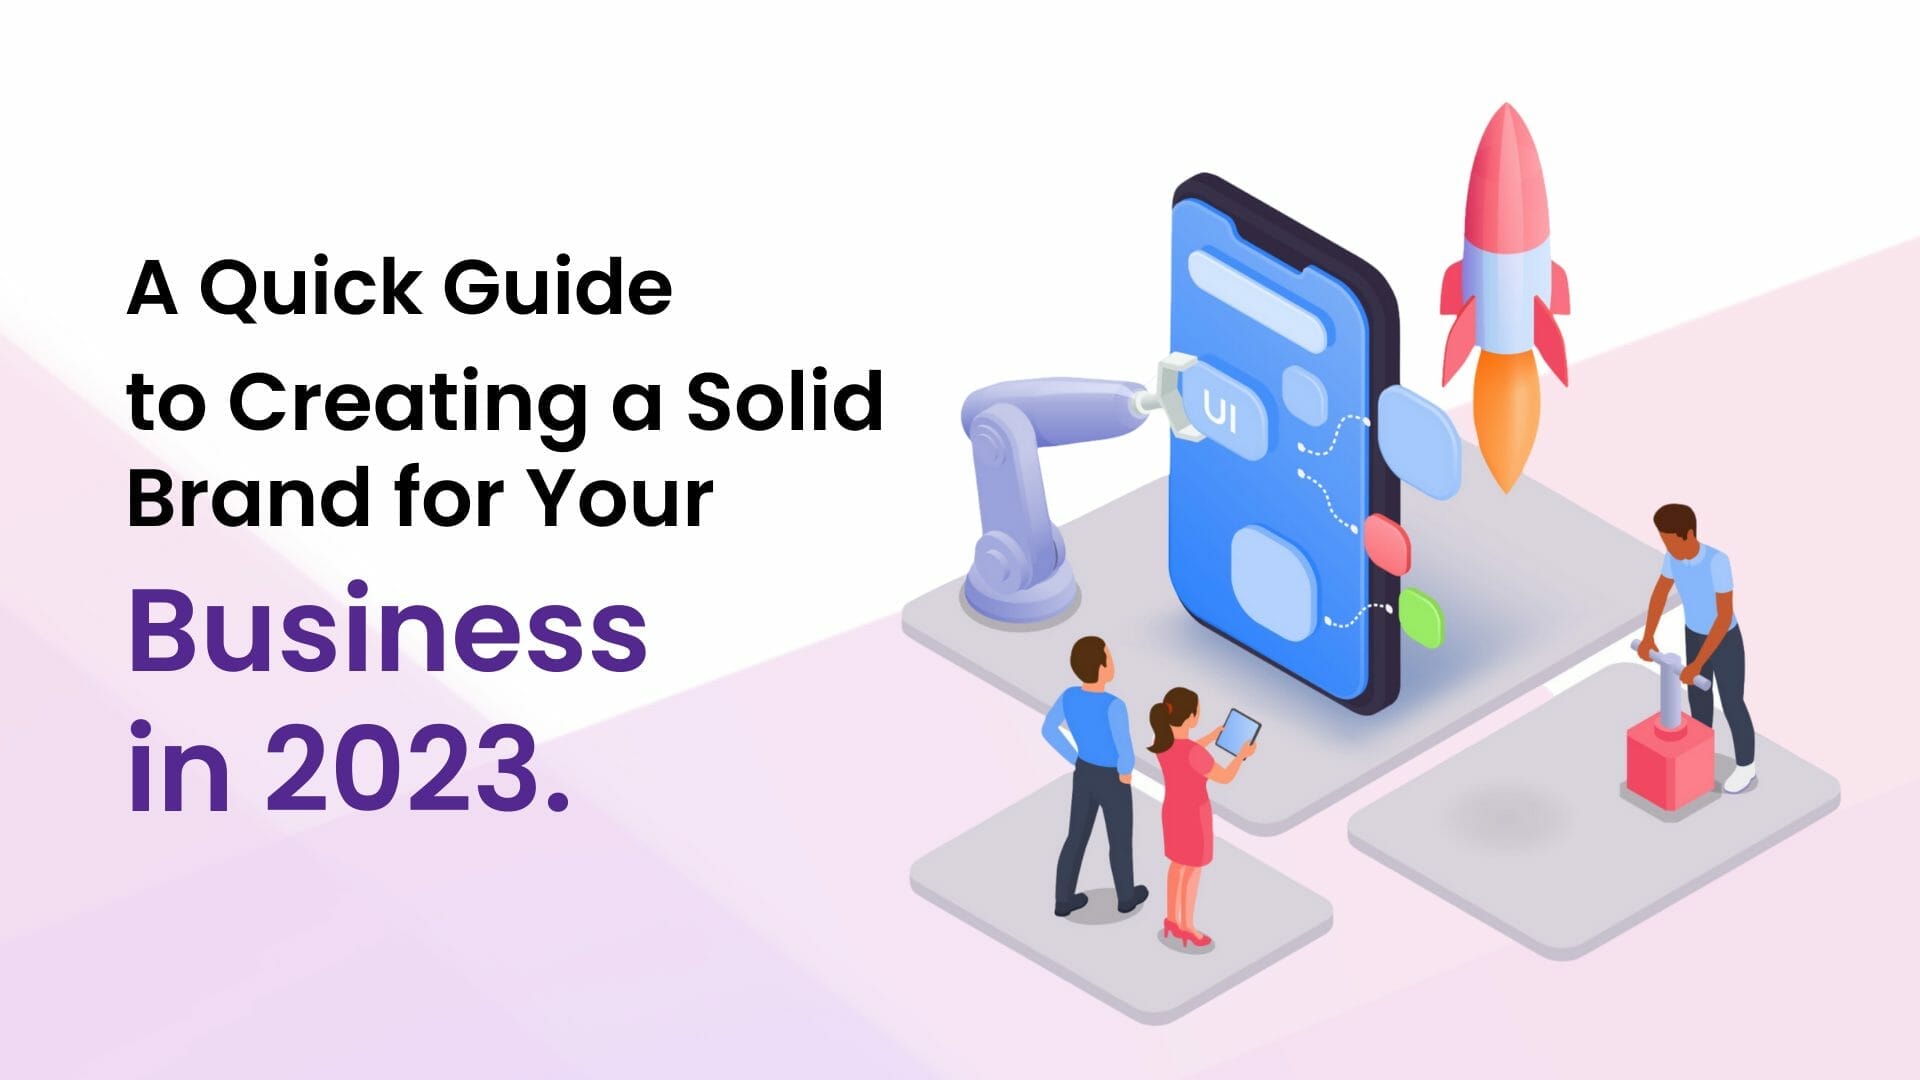 A Quick Guide to Creating a Solid Brand for Your Business in 2023